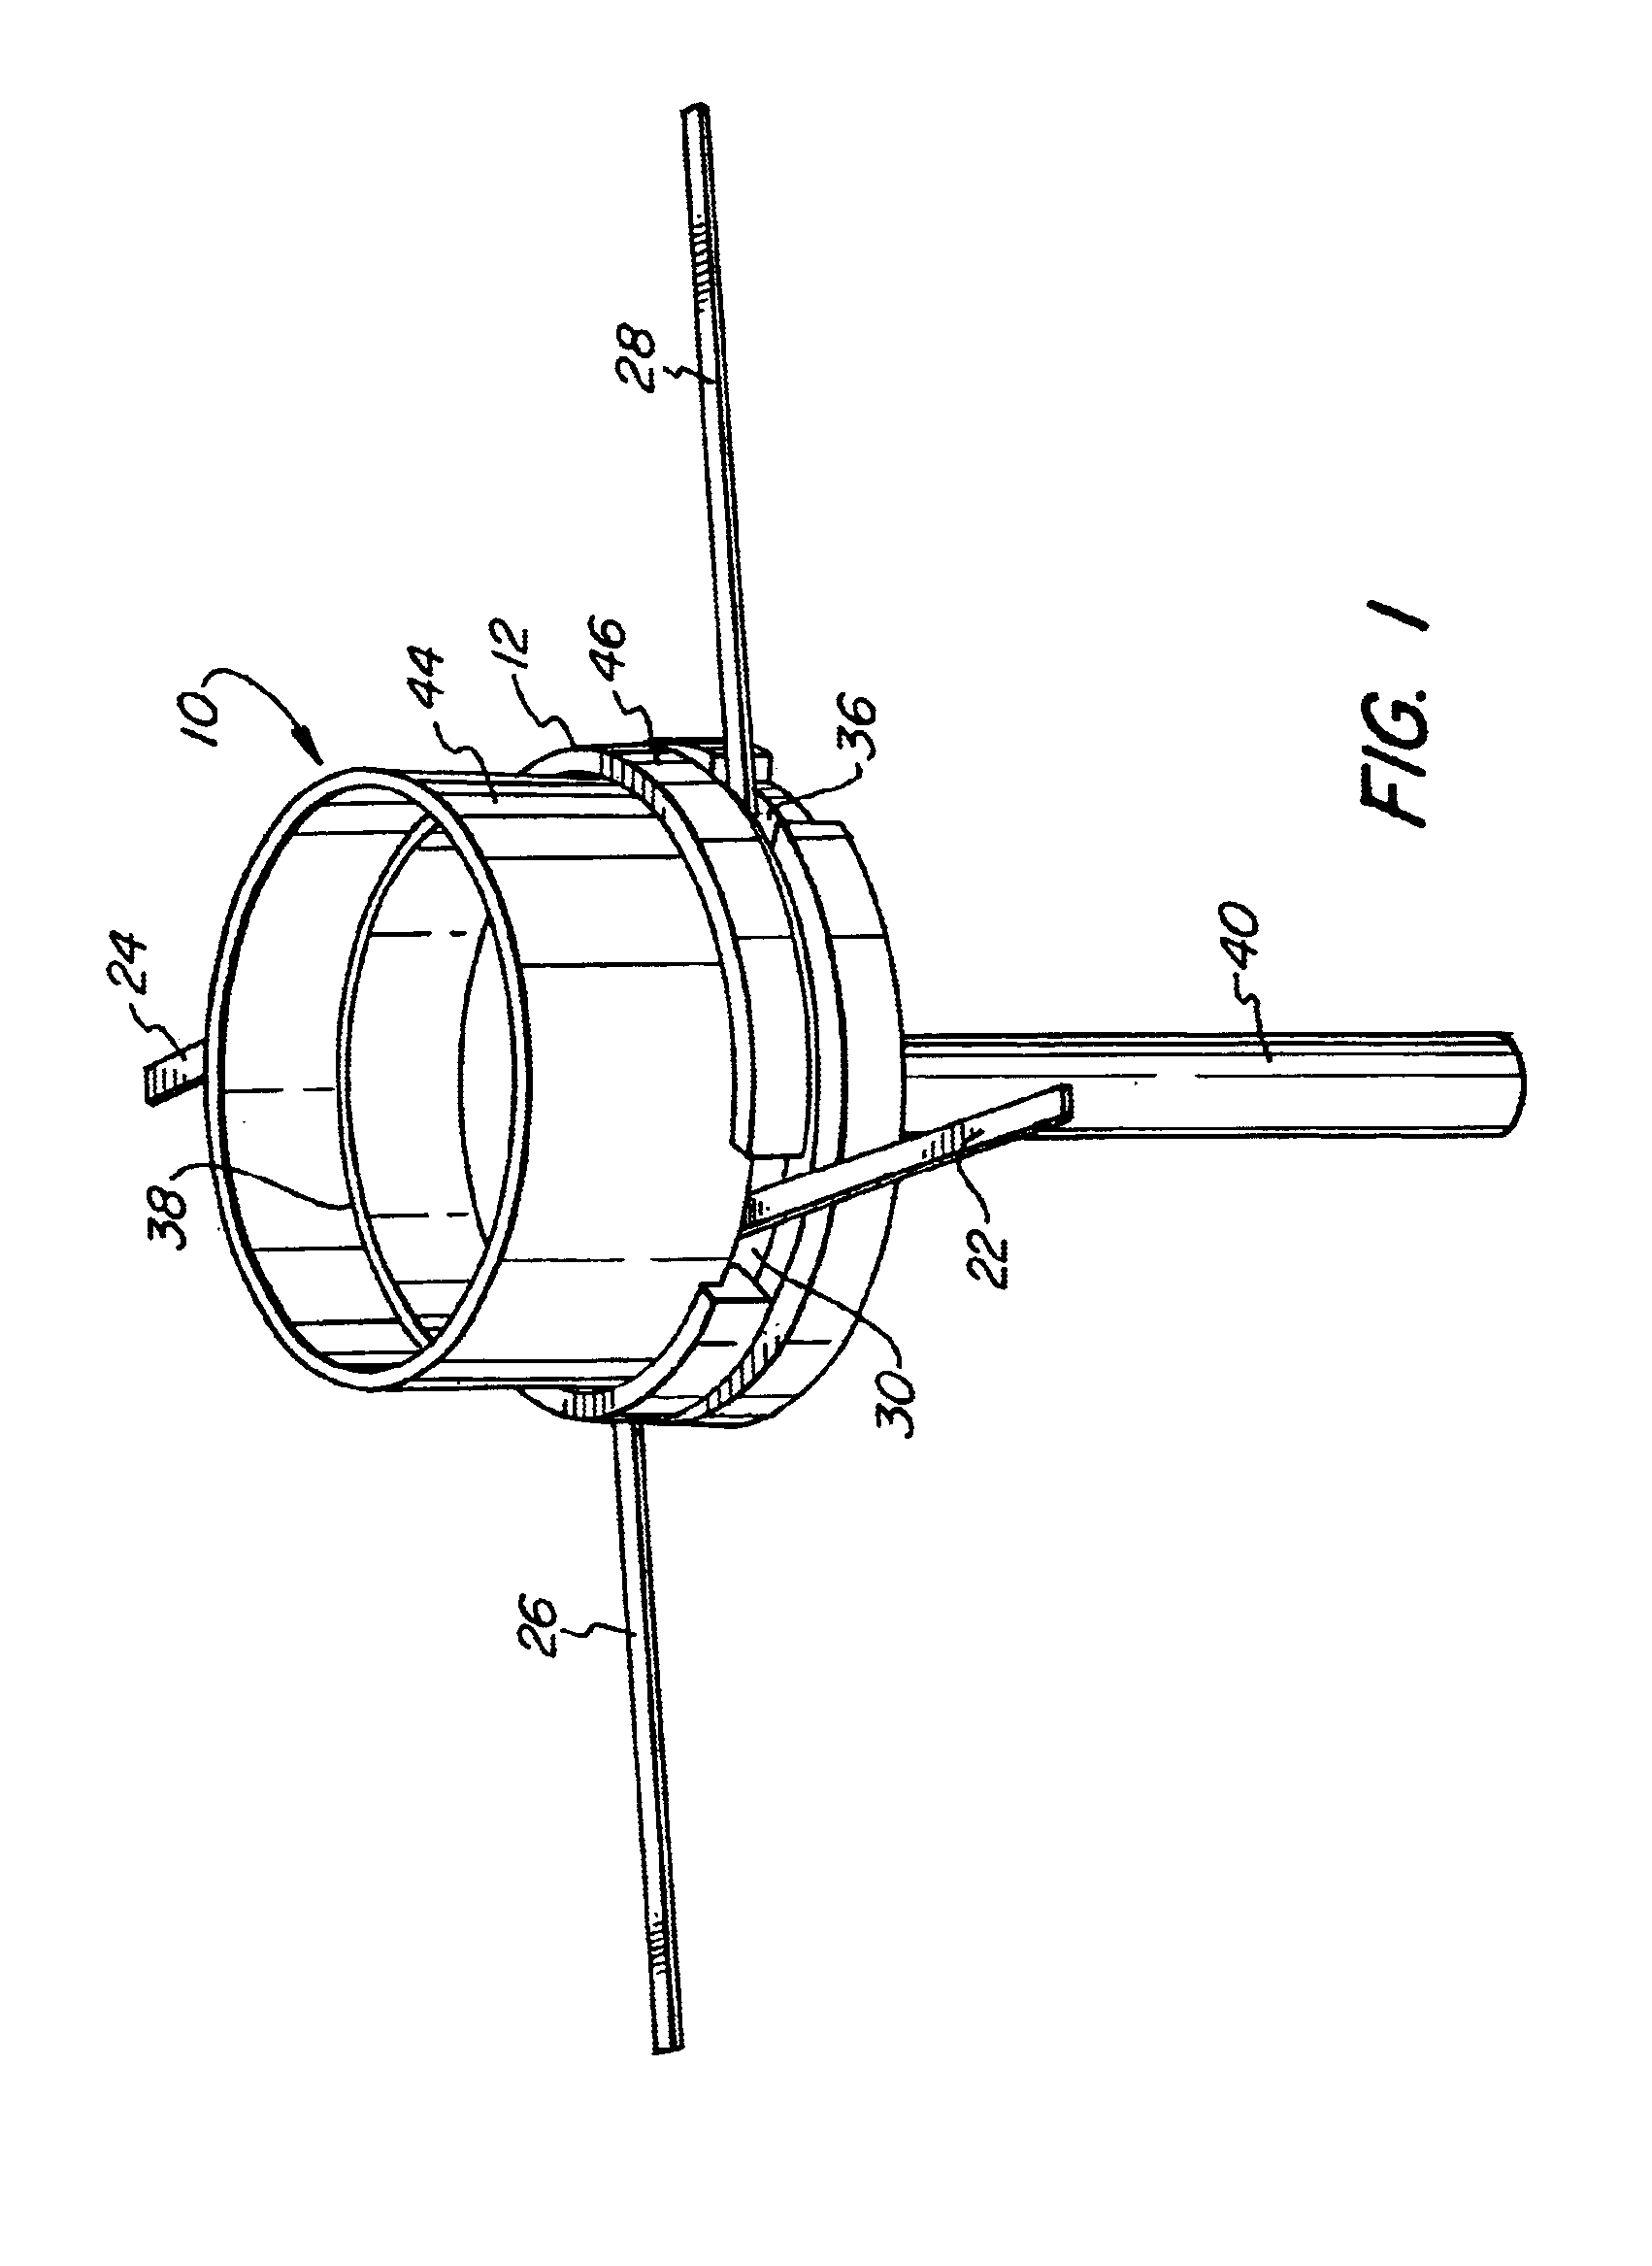 Instrument material holder and method of fabrication thereof